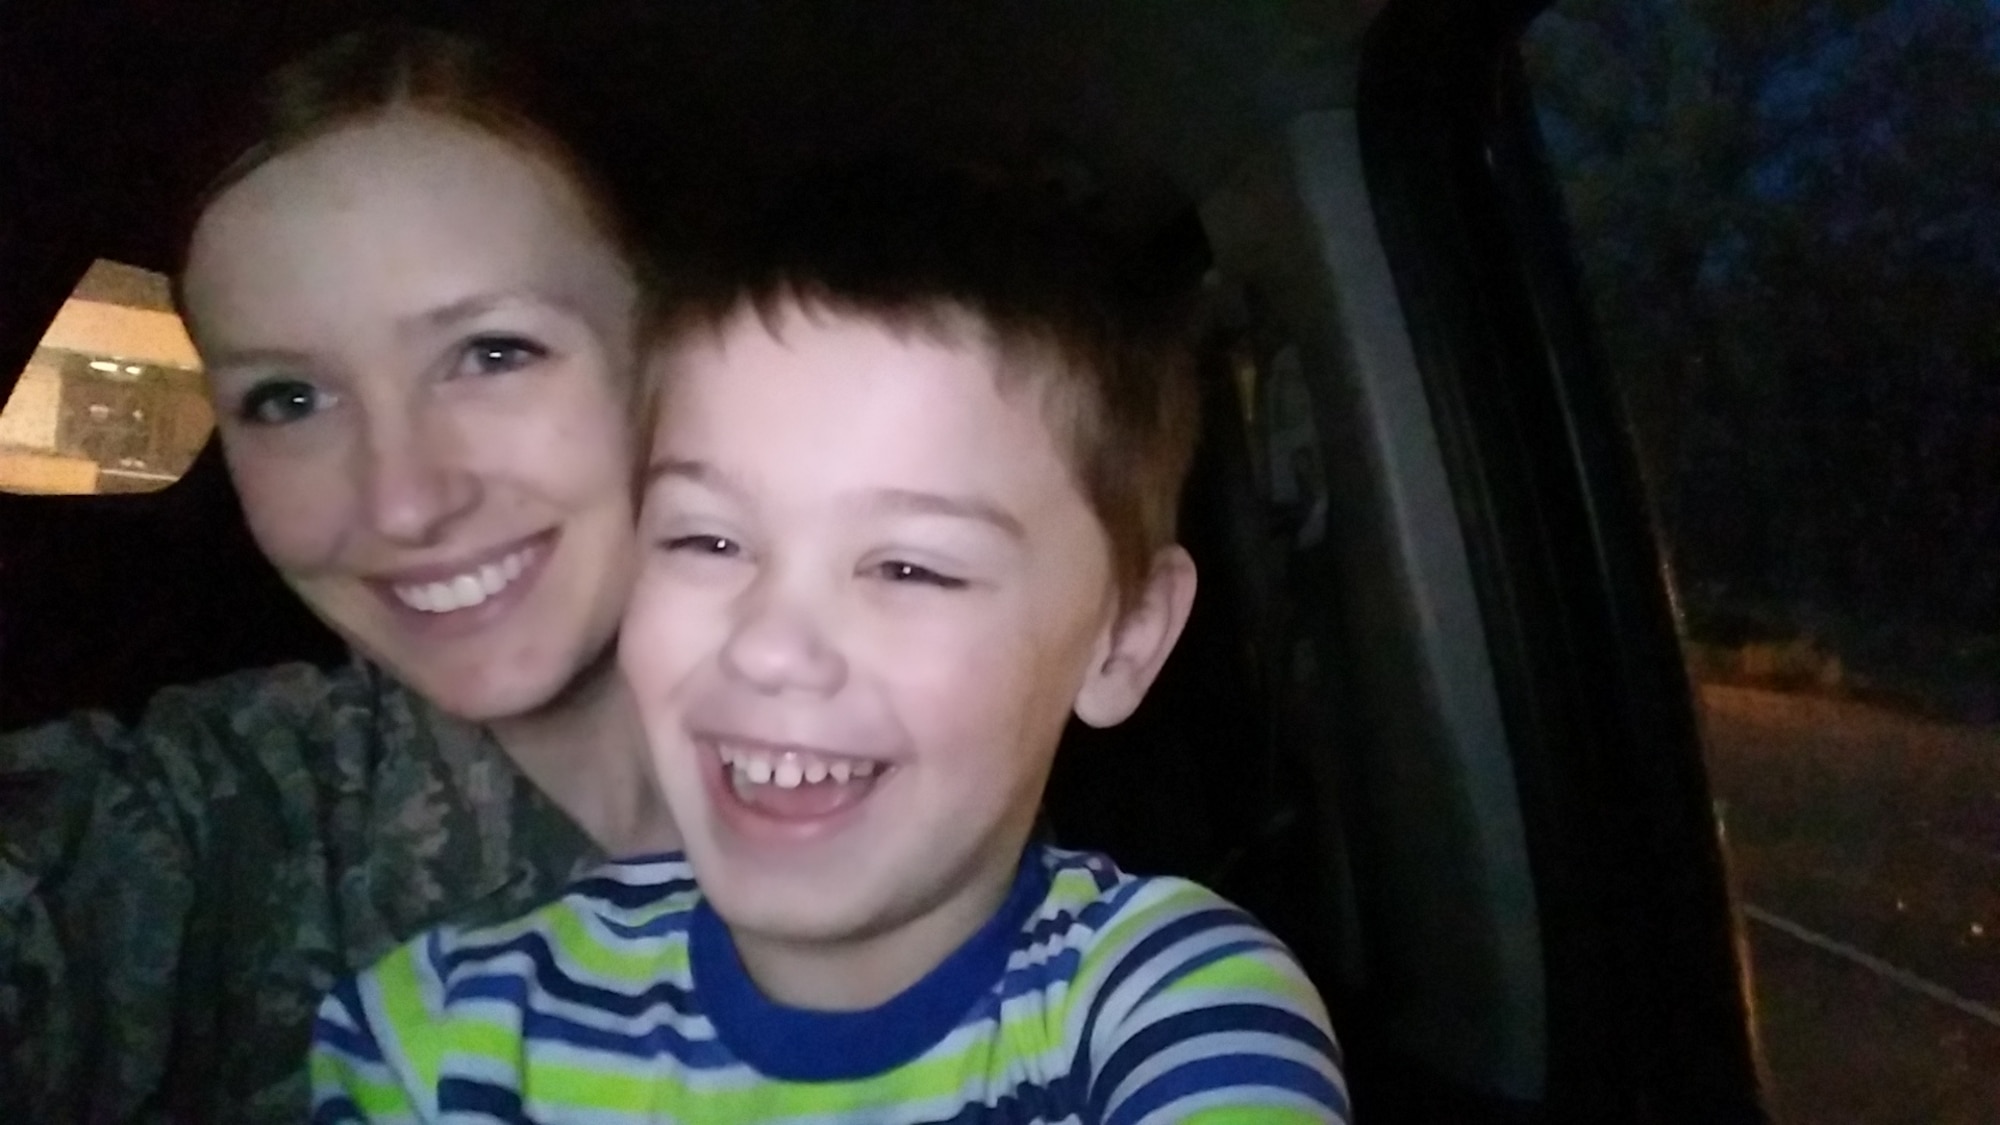 U.S. Air Force Senior Airman Katie Cogbill, 19th Medical Operations Squadron medical technician, takes a selfie with her son, Barrett. (Courtesy photo)